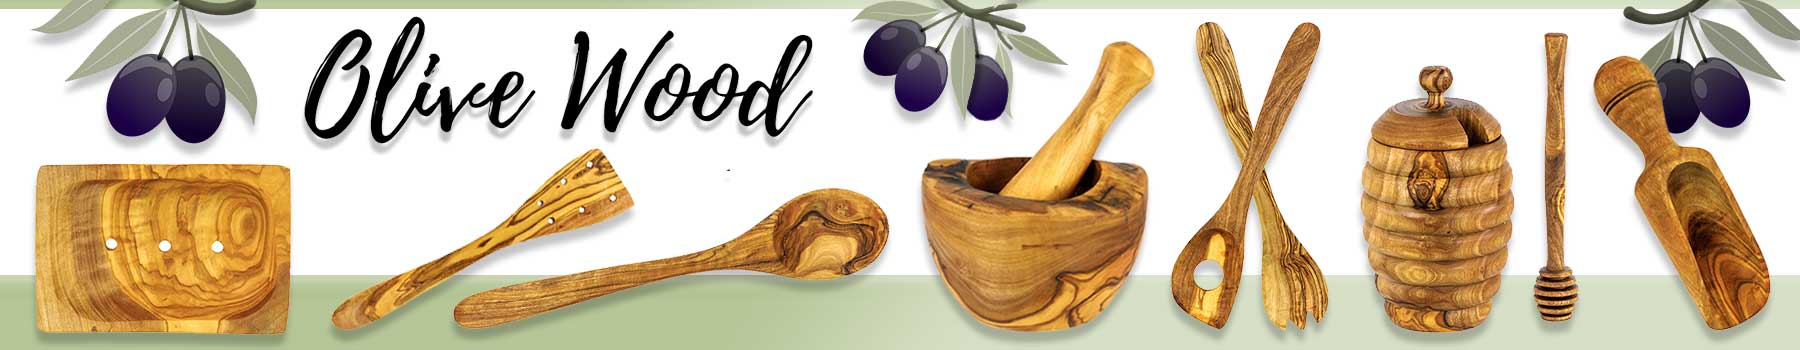 WHOLESALE OLIVE WOOD PRODUCTS 